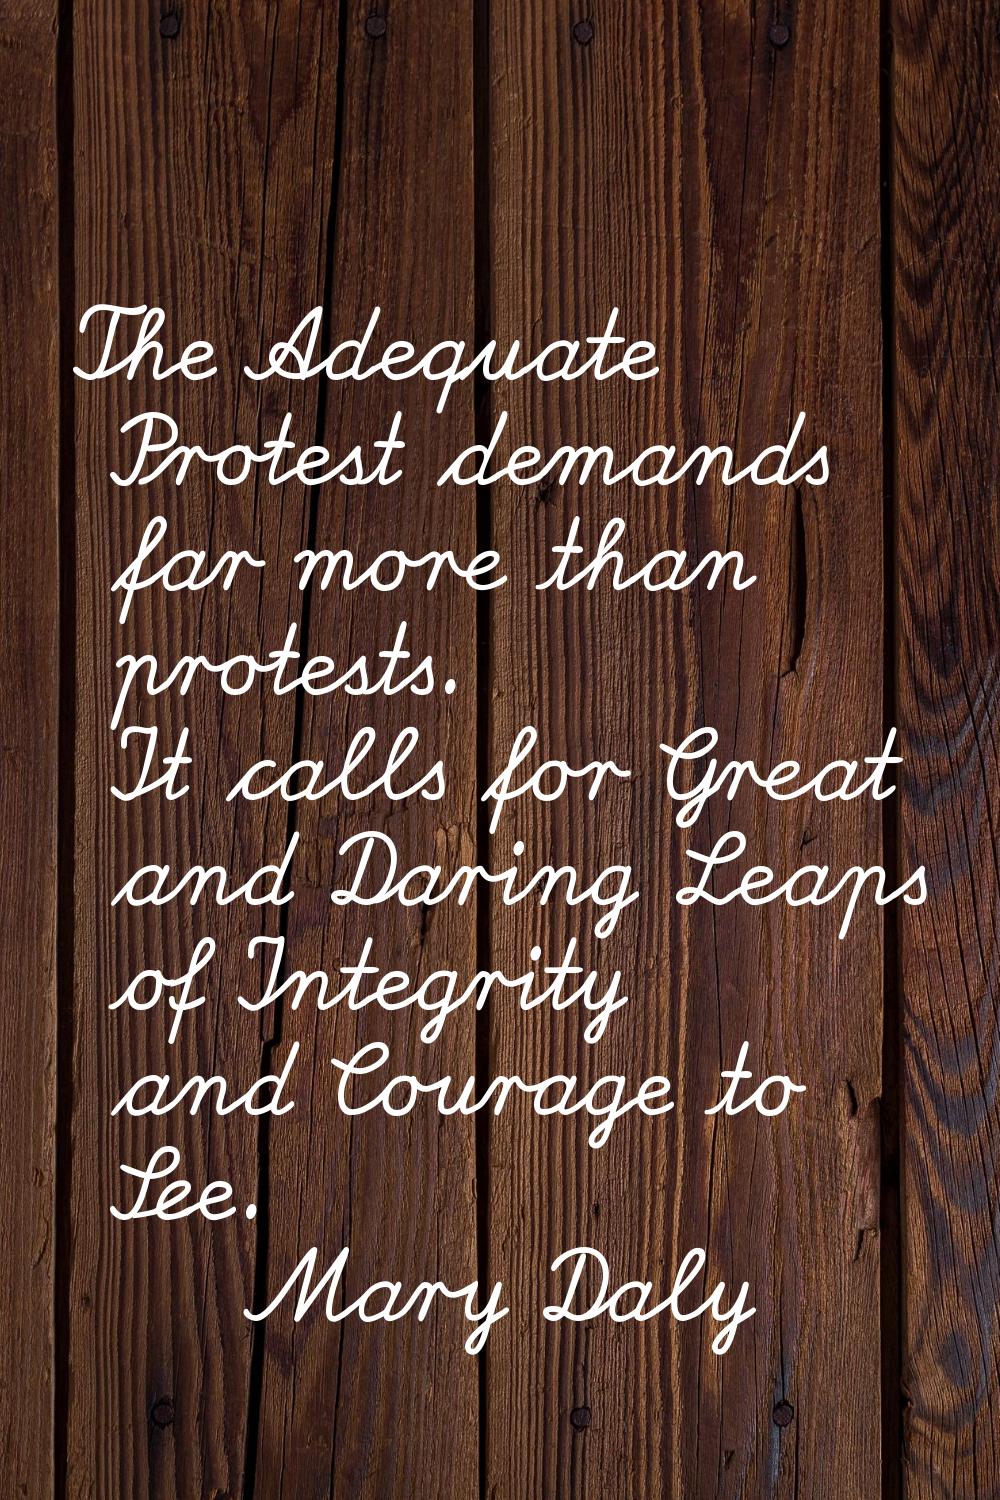 The Adequate Protest demands far more than protests. It calls for Great and Daring Leaps of Integri